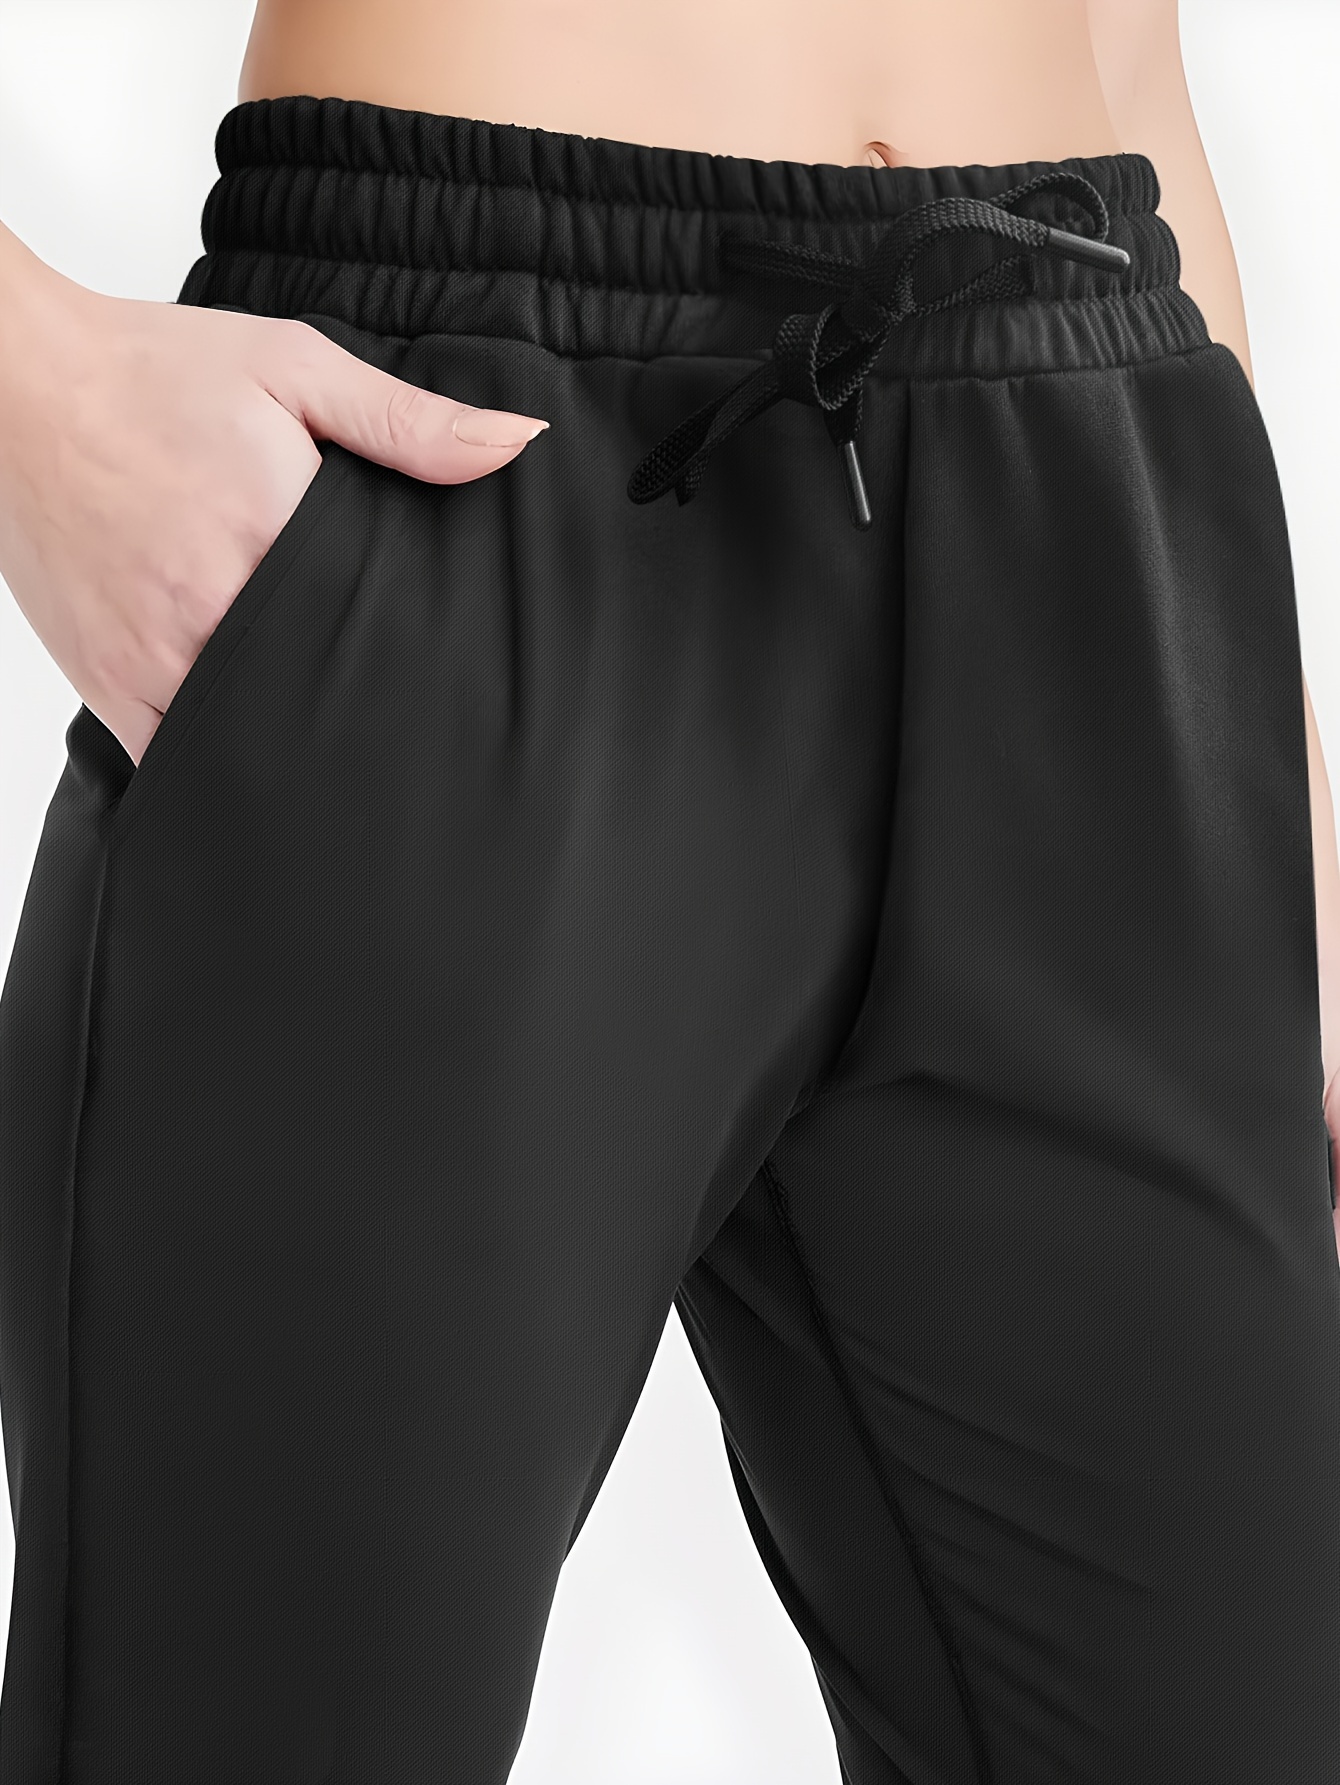 Solid Color Casual Sports Pants With Pocket, Drawstring Running Jogger Sweatpants, Women s Activewear